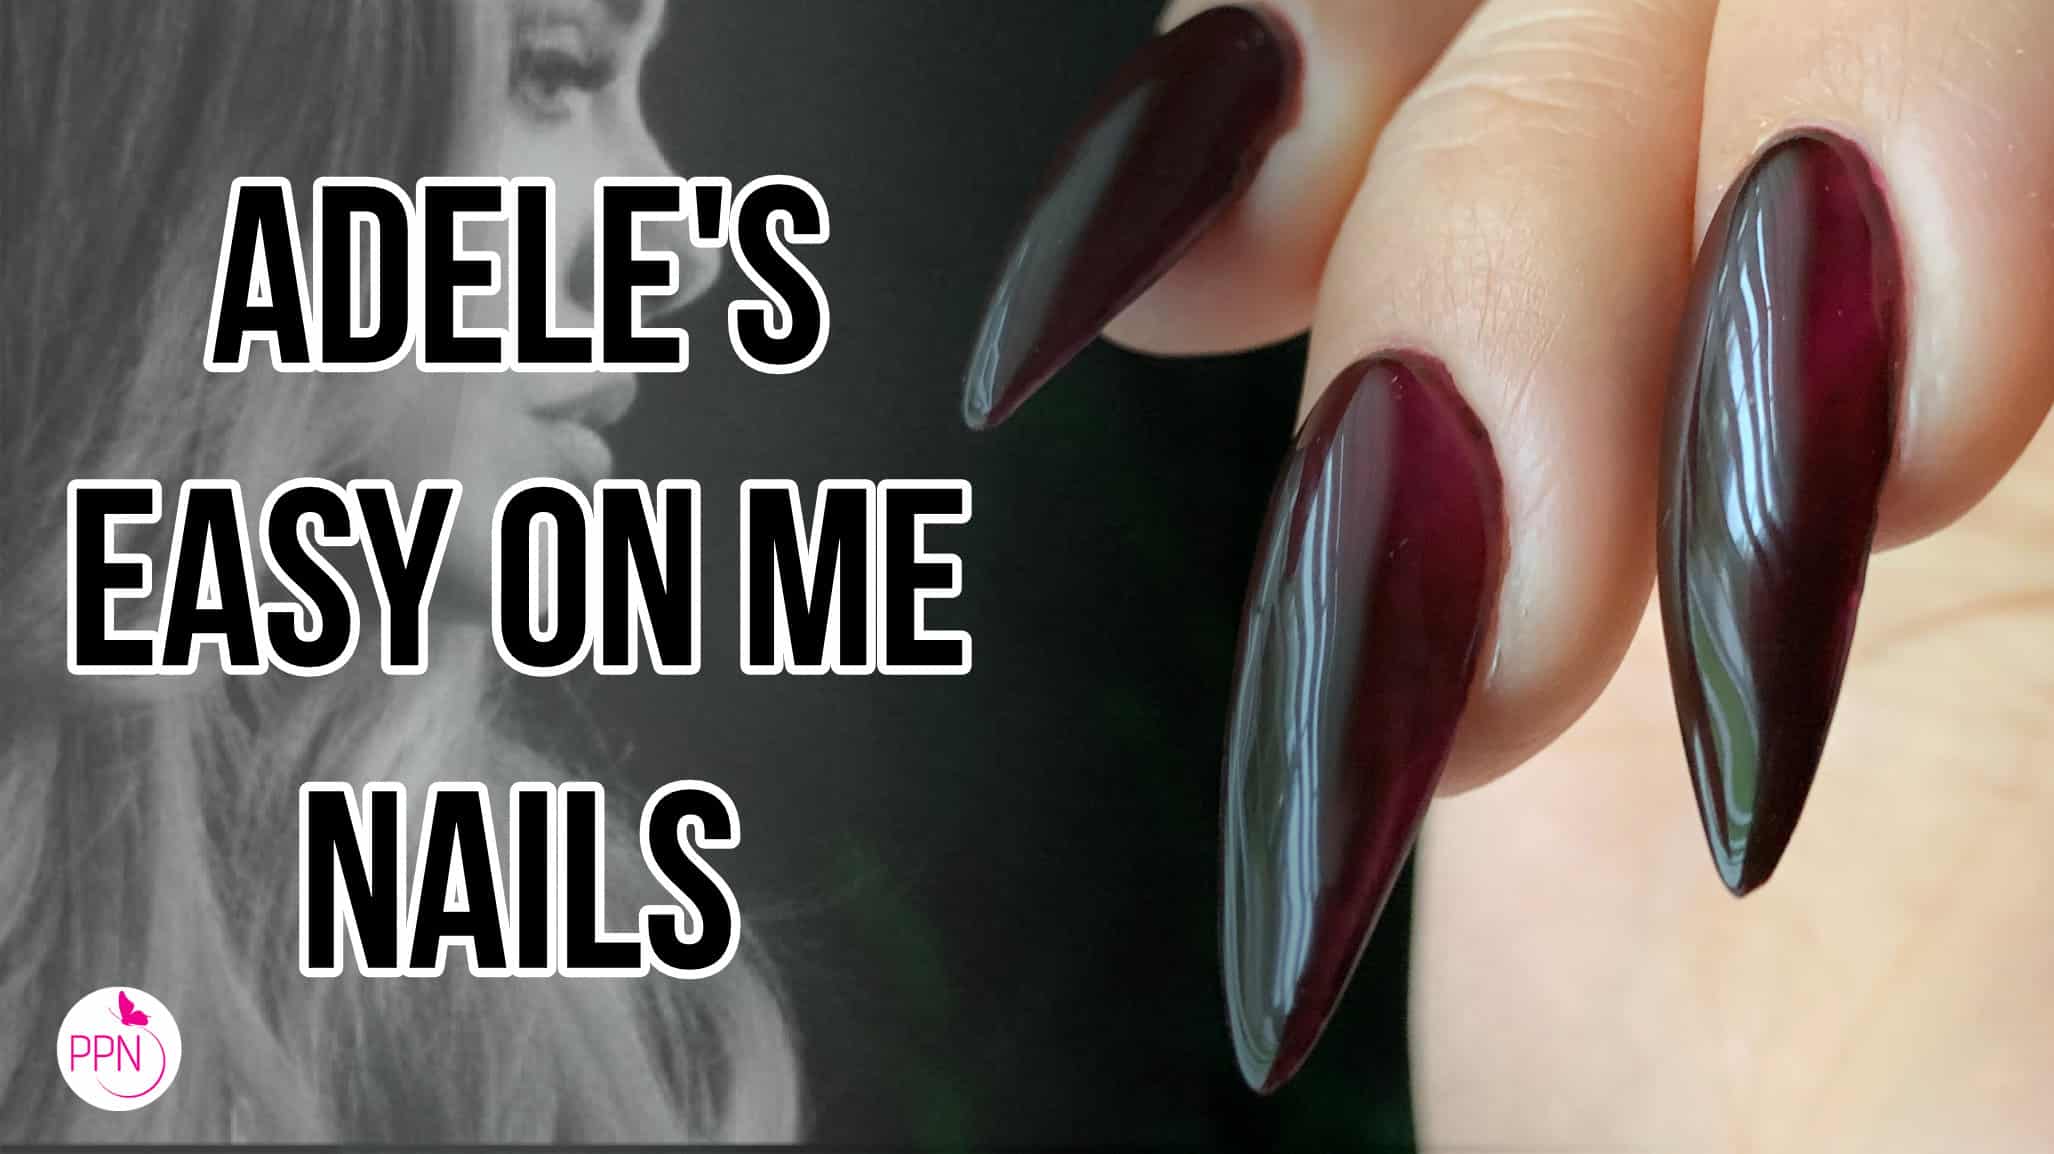 Adele's New Song "Easy On Me" Nail Tutorial Sculpted Gel Extensions